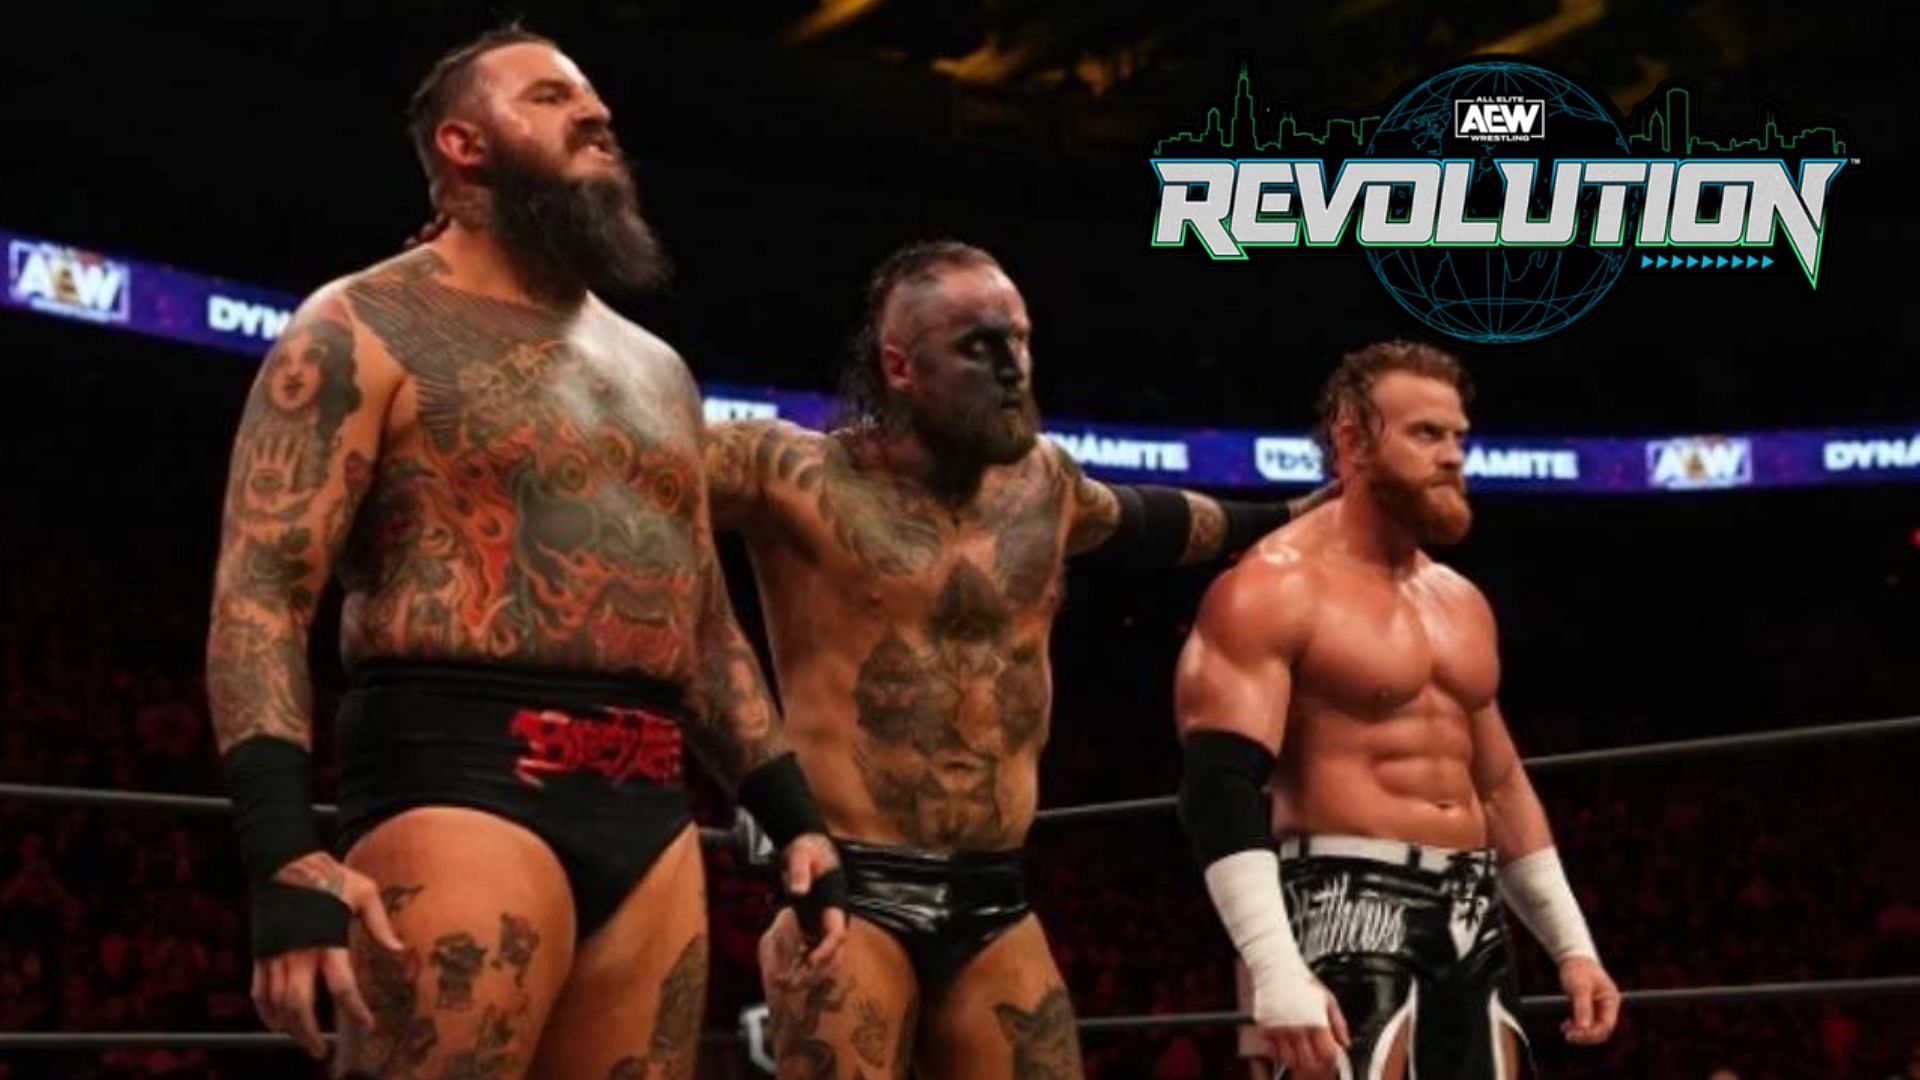 The House of Black are set to challenge for the AEW trios champion